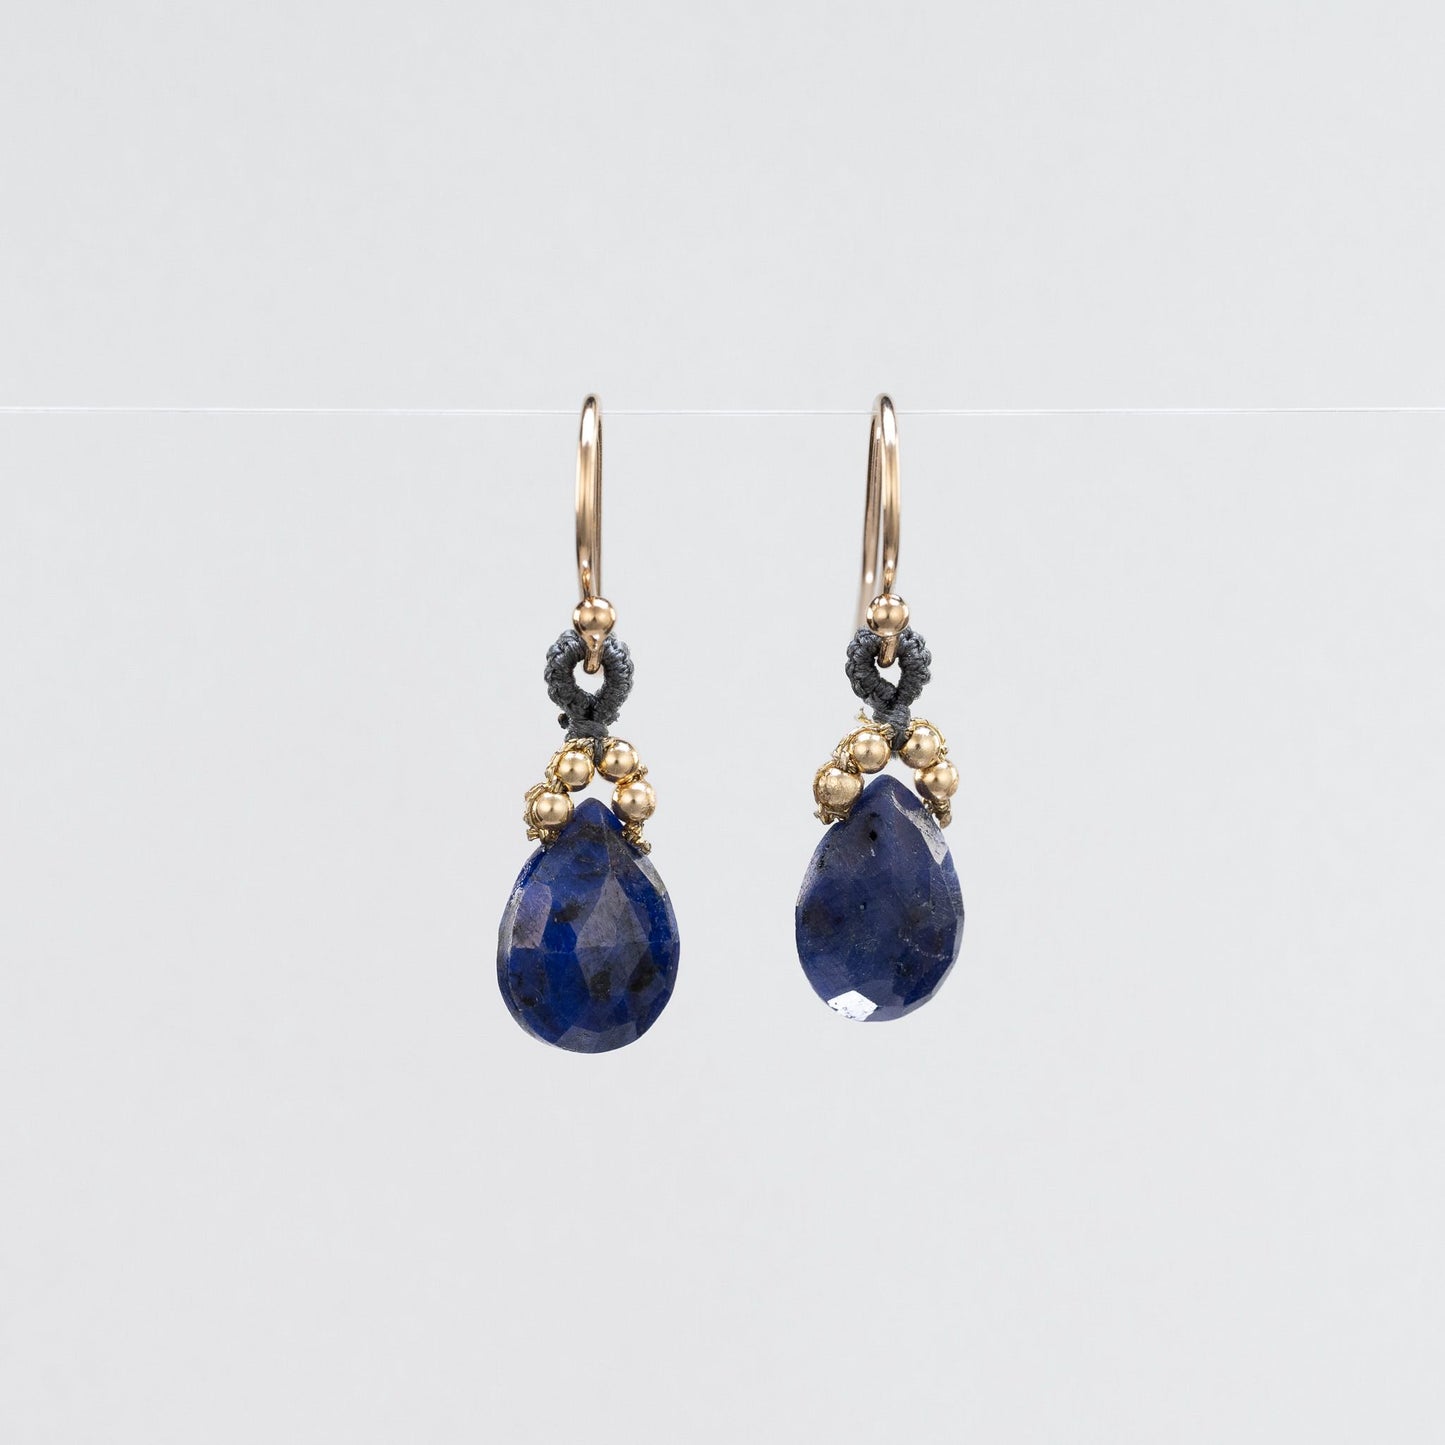 Load image into Gallery viewer, Danielle Welmond Lapis Drop Earrings with Coordinating Grey Silk Cord
